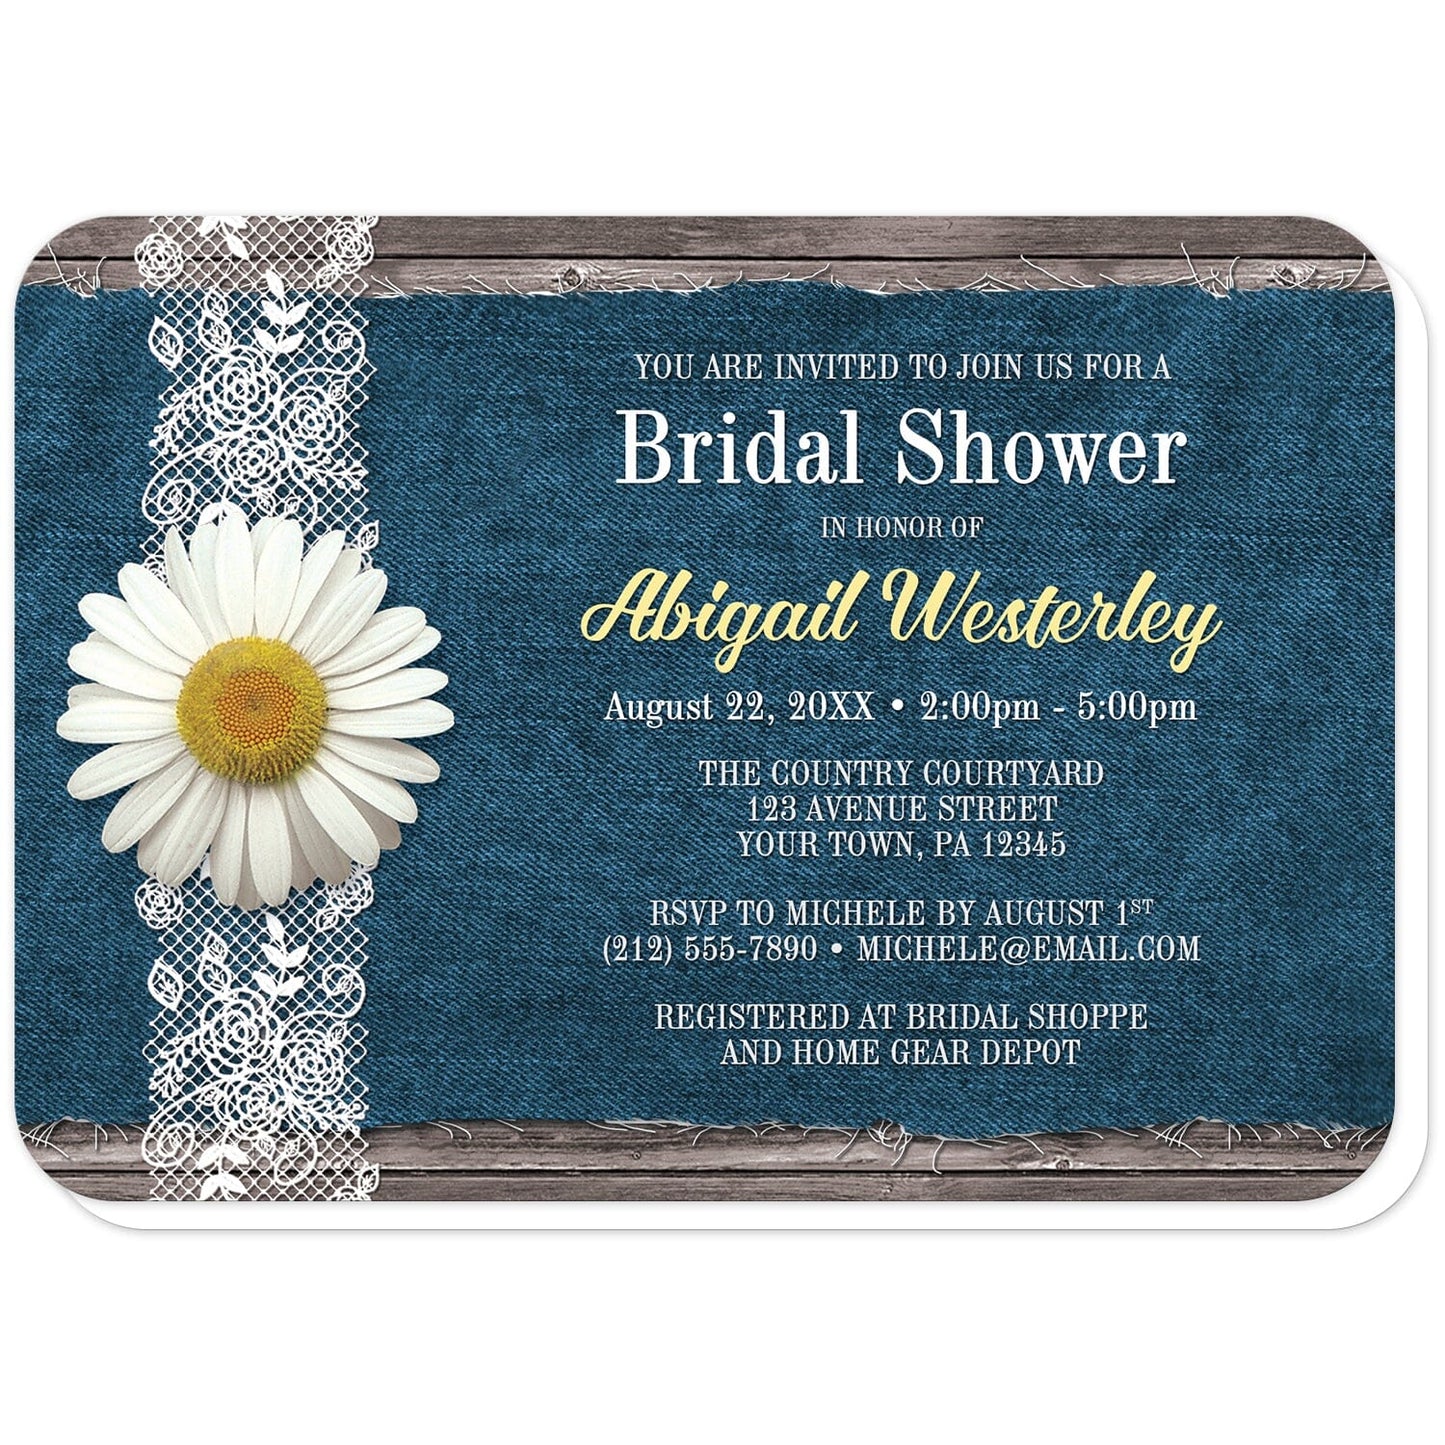 Daisy Denim and Lace Rustic Bridal Shower Invitations (with rounded corners) at Artistically Invited. Daisy denim and lace rustic bridal shower invitations with a white daisy flower on a white lace ribbon along the left side. Your personalized bridal shower celebration details are custom printed in white, light gray, and yellow over a fraying blue denim fabric background illustration over rustic wood.